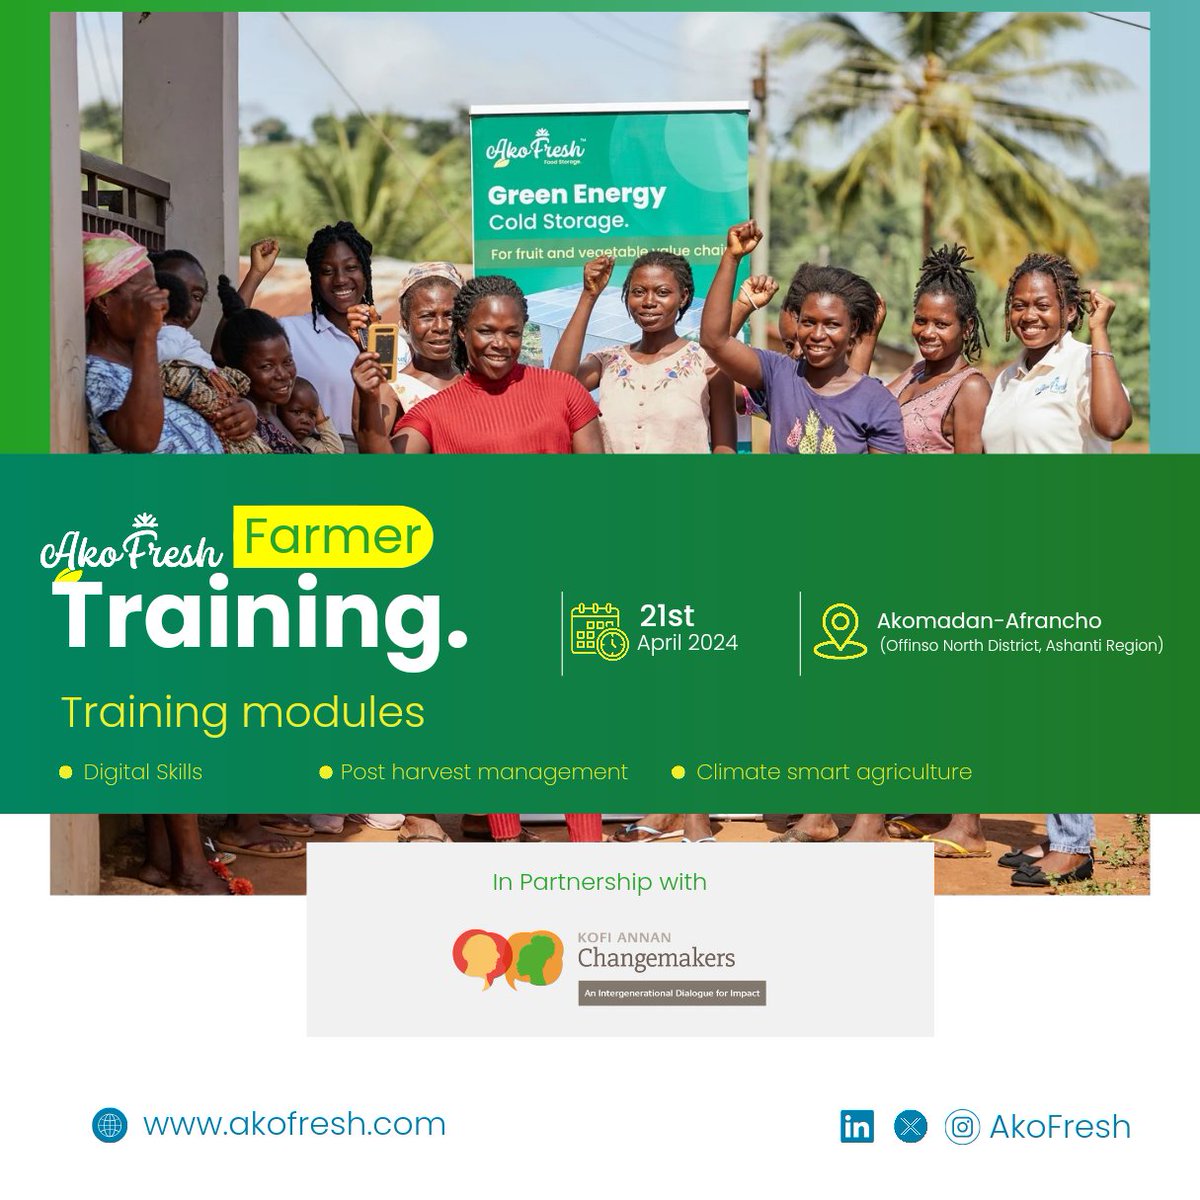 AkoFresh is bringing its first farmer training session of the year to Akumadan-Afrancho this Sunday! Farmers will learn sustainable practices, digital skills, and gain access to a cutting-edge learning platform for continuous growth. Stay tuned for updates! #AkoFresh #Training